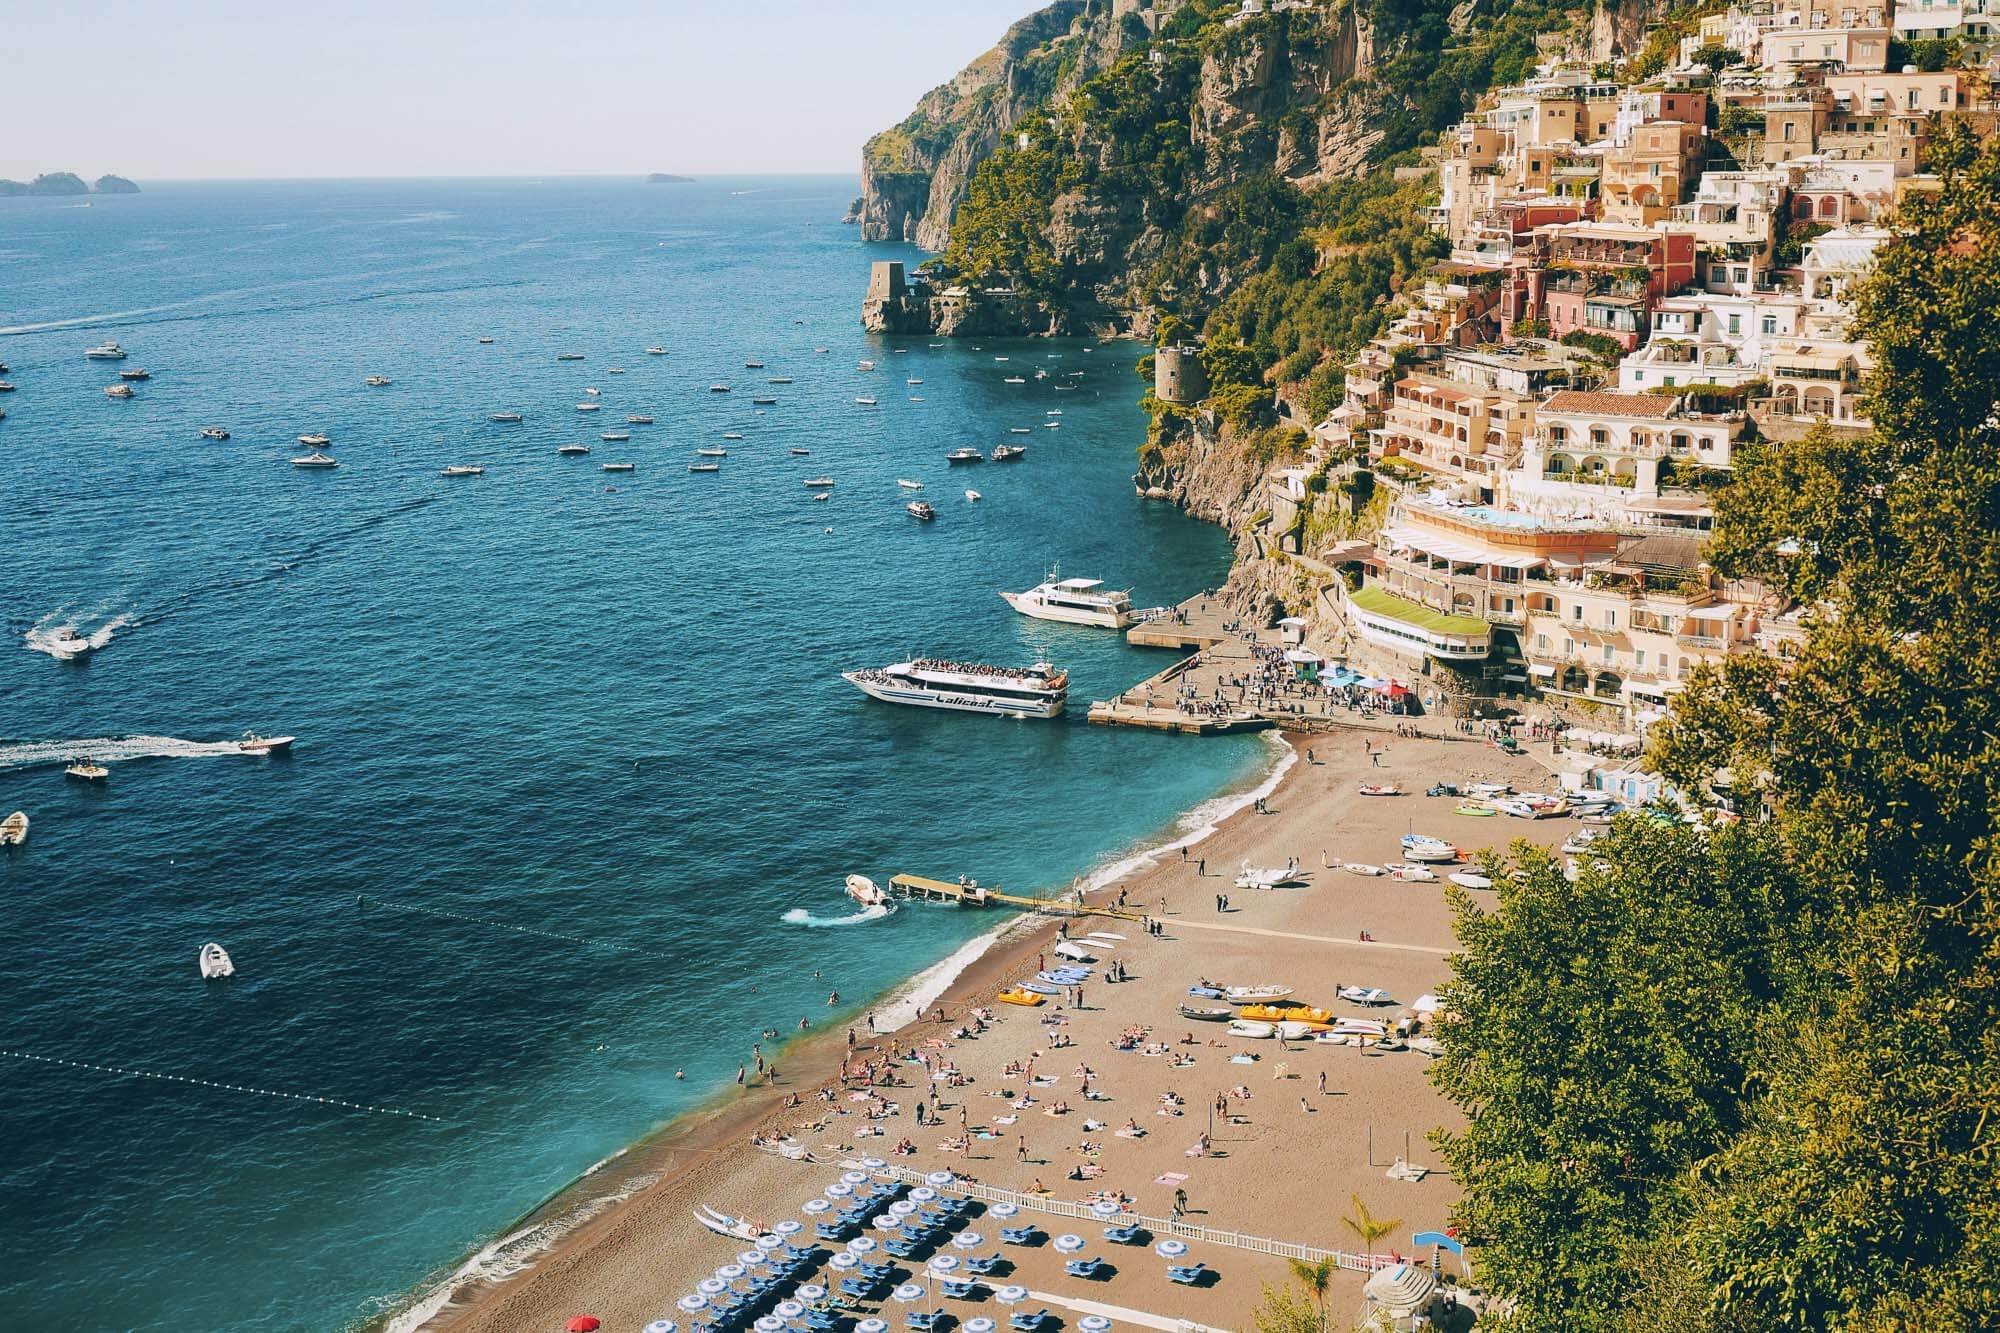 If you fly into Naples International Airport, the nearest airport to Amalfi Coast, you have a few options on getting from Naples to Positano.